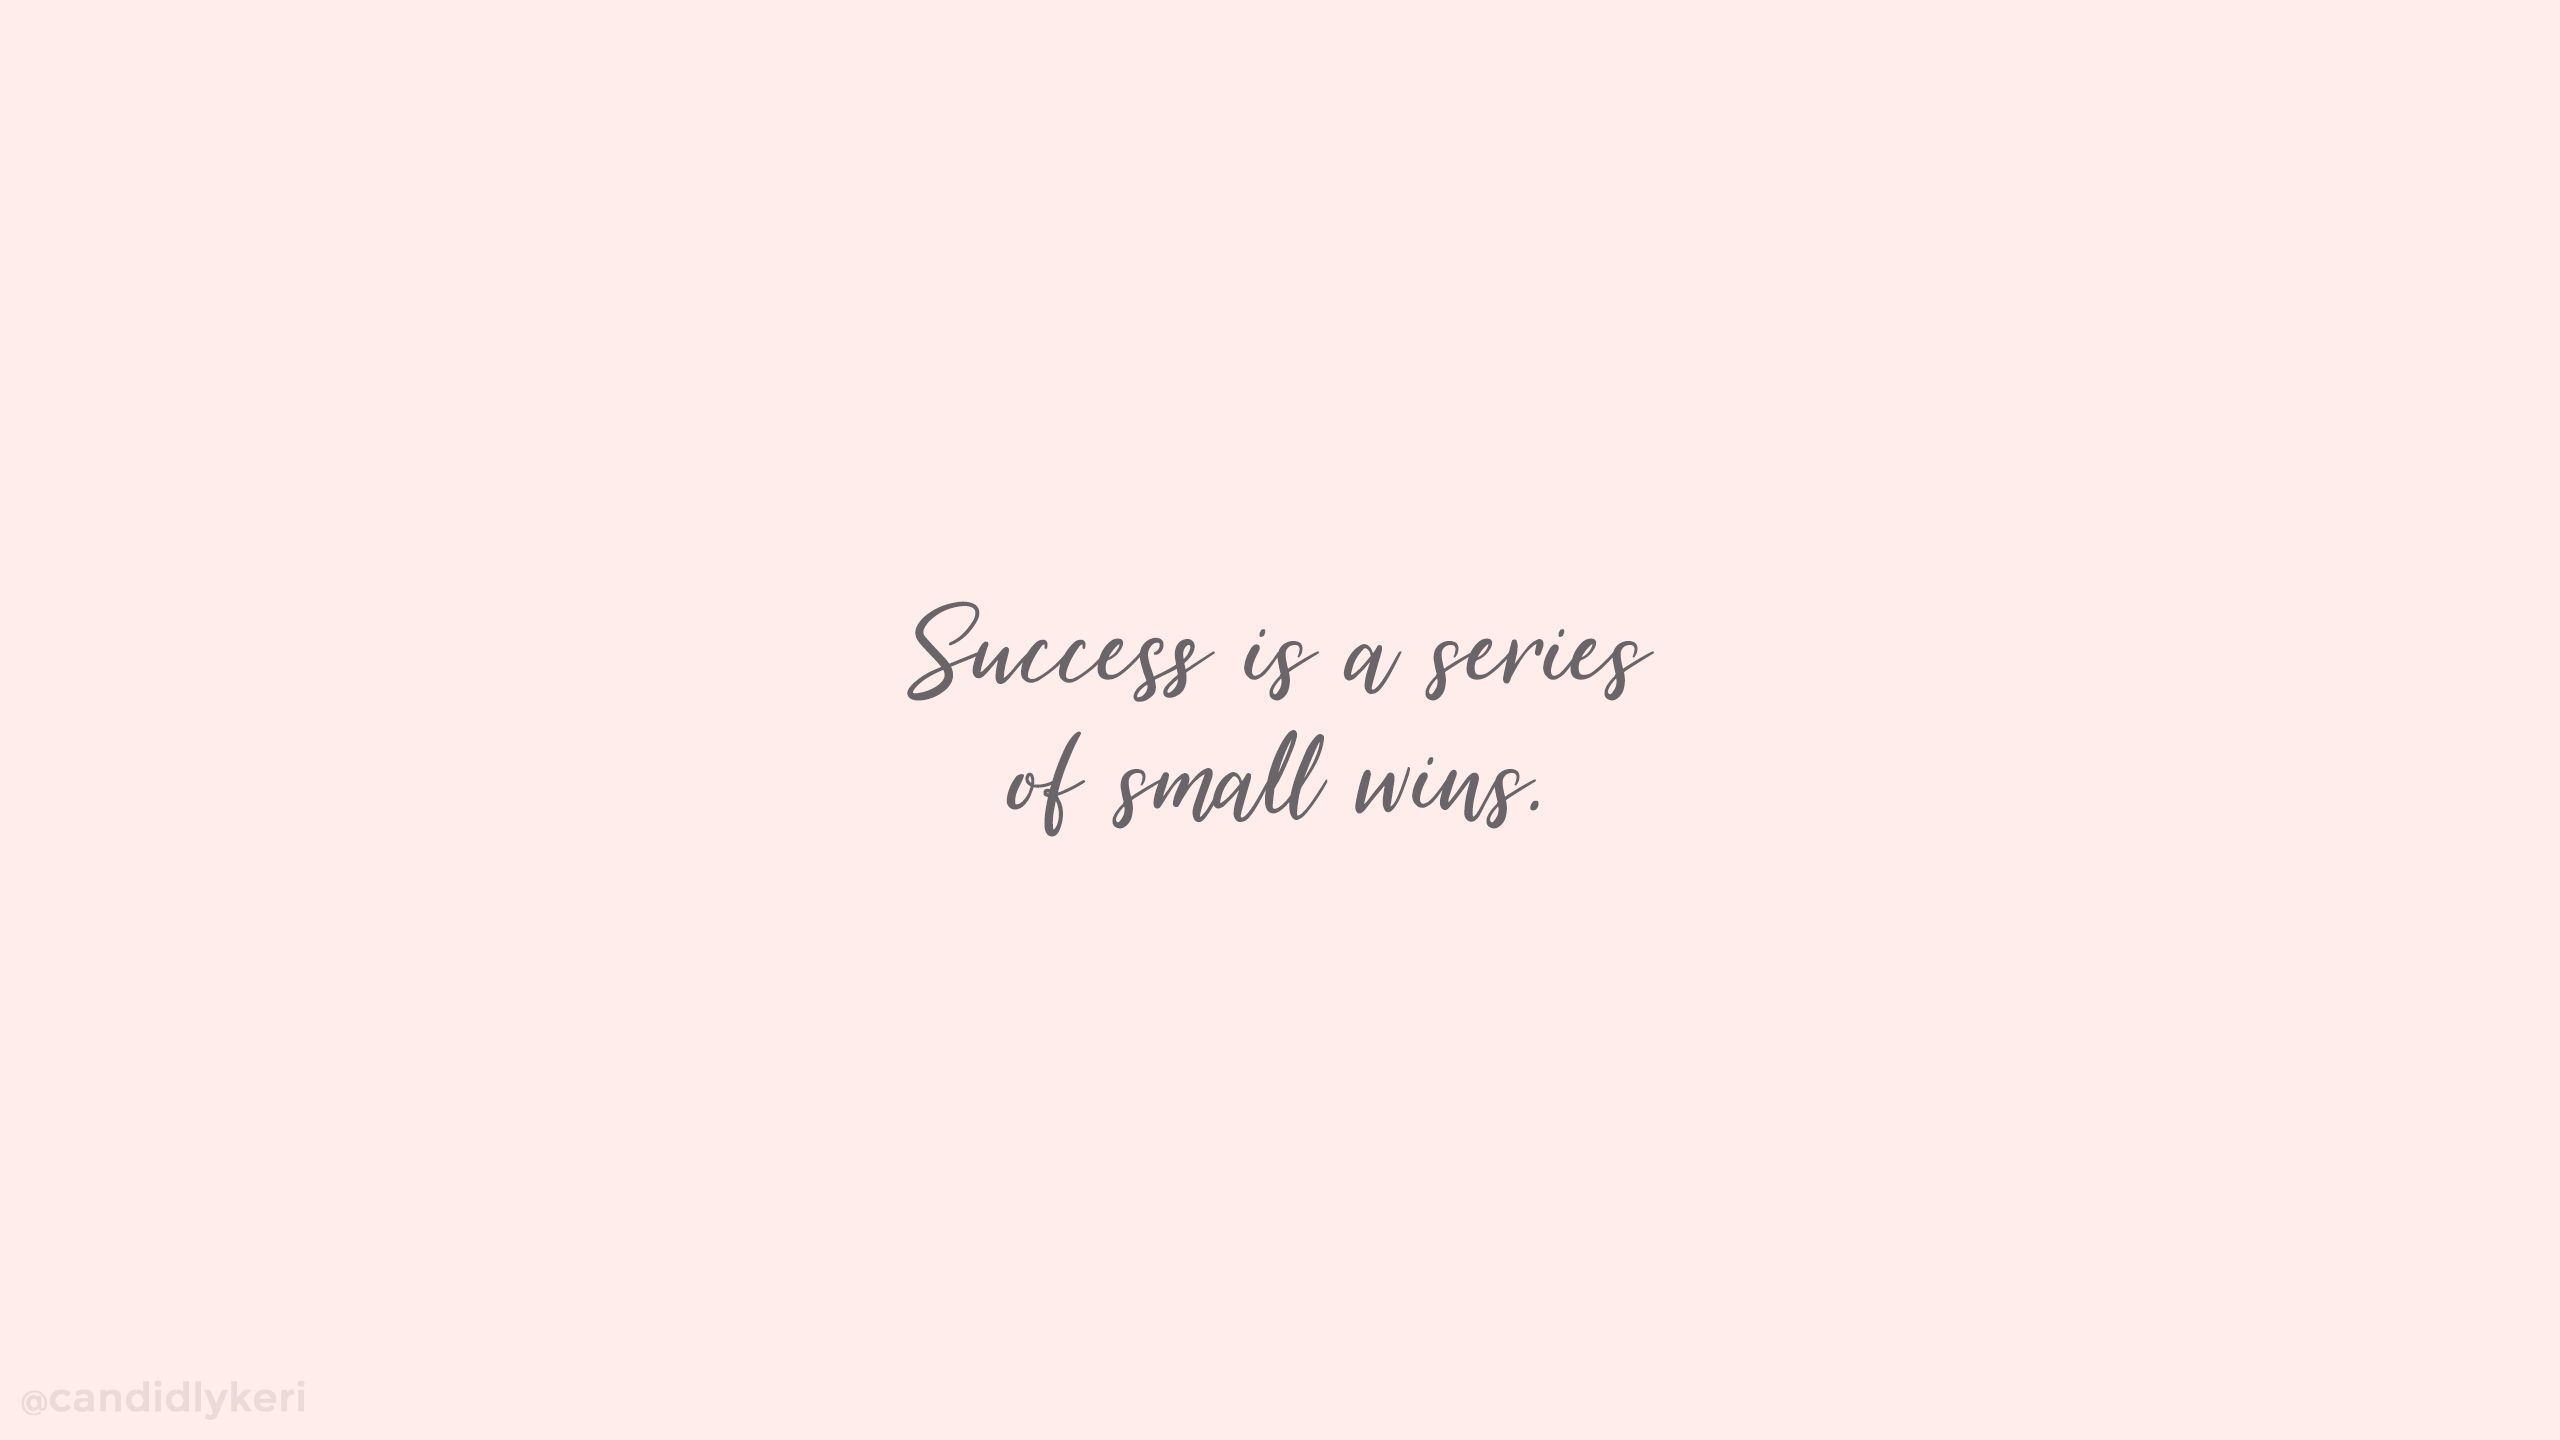 Success is a series of small wins quote wallpaper for desktop or phone - Desktop, quotes, inspirational, motivational